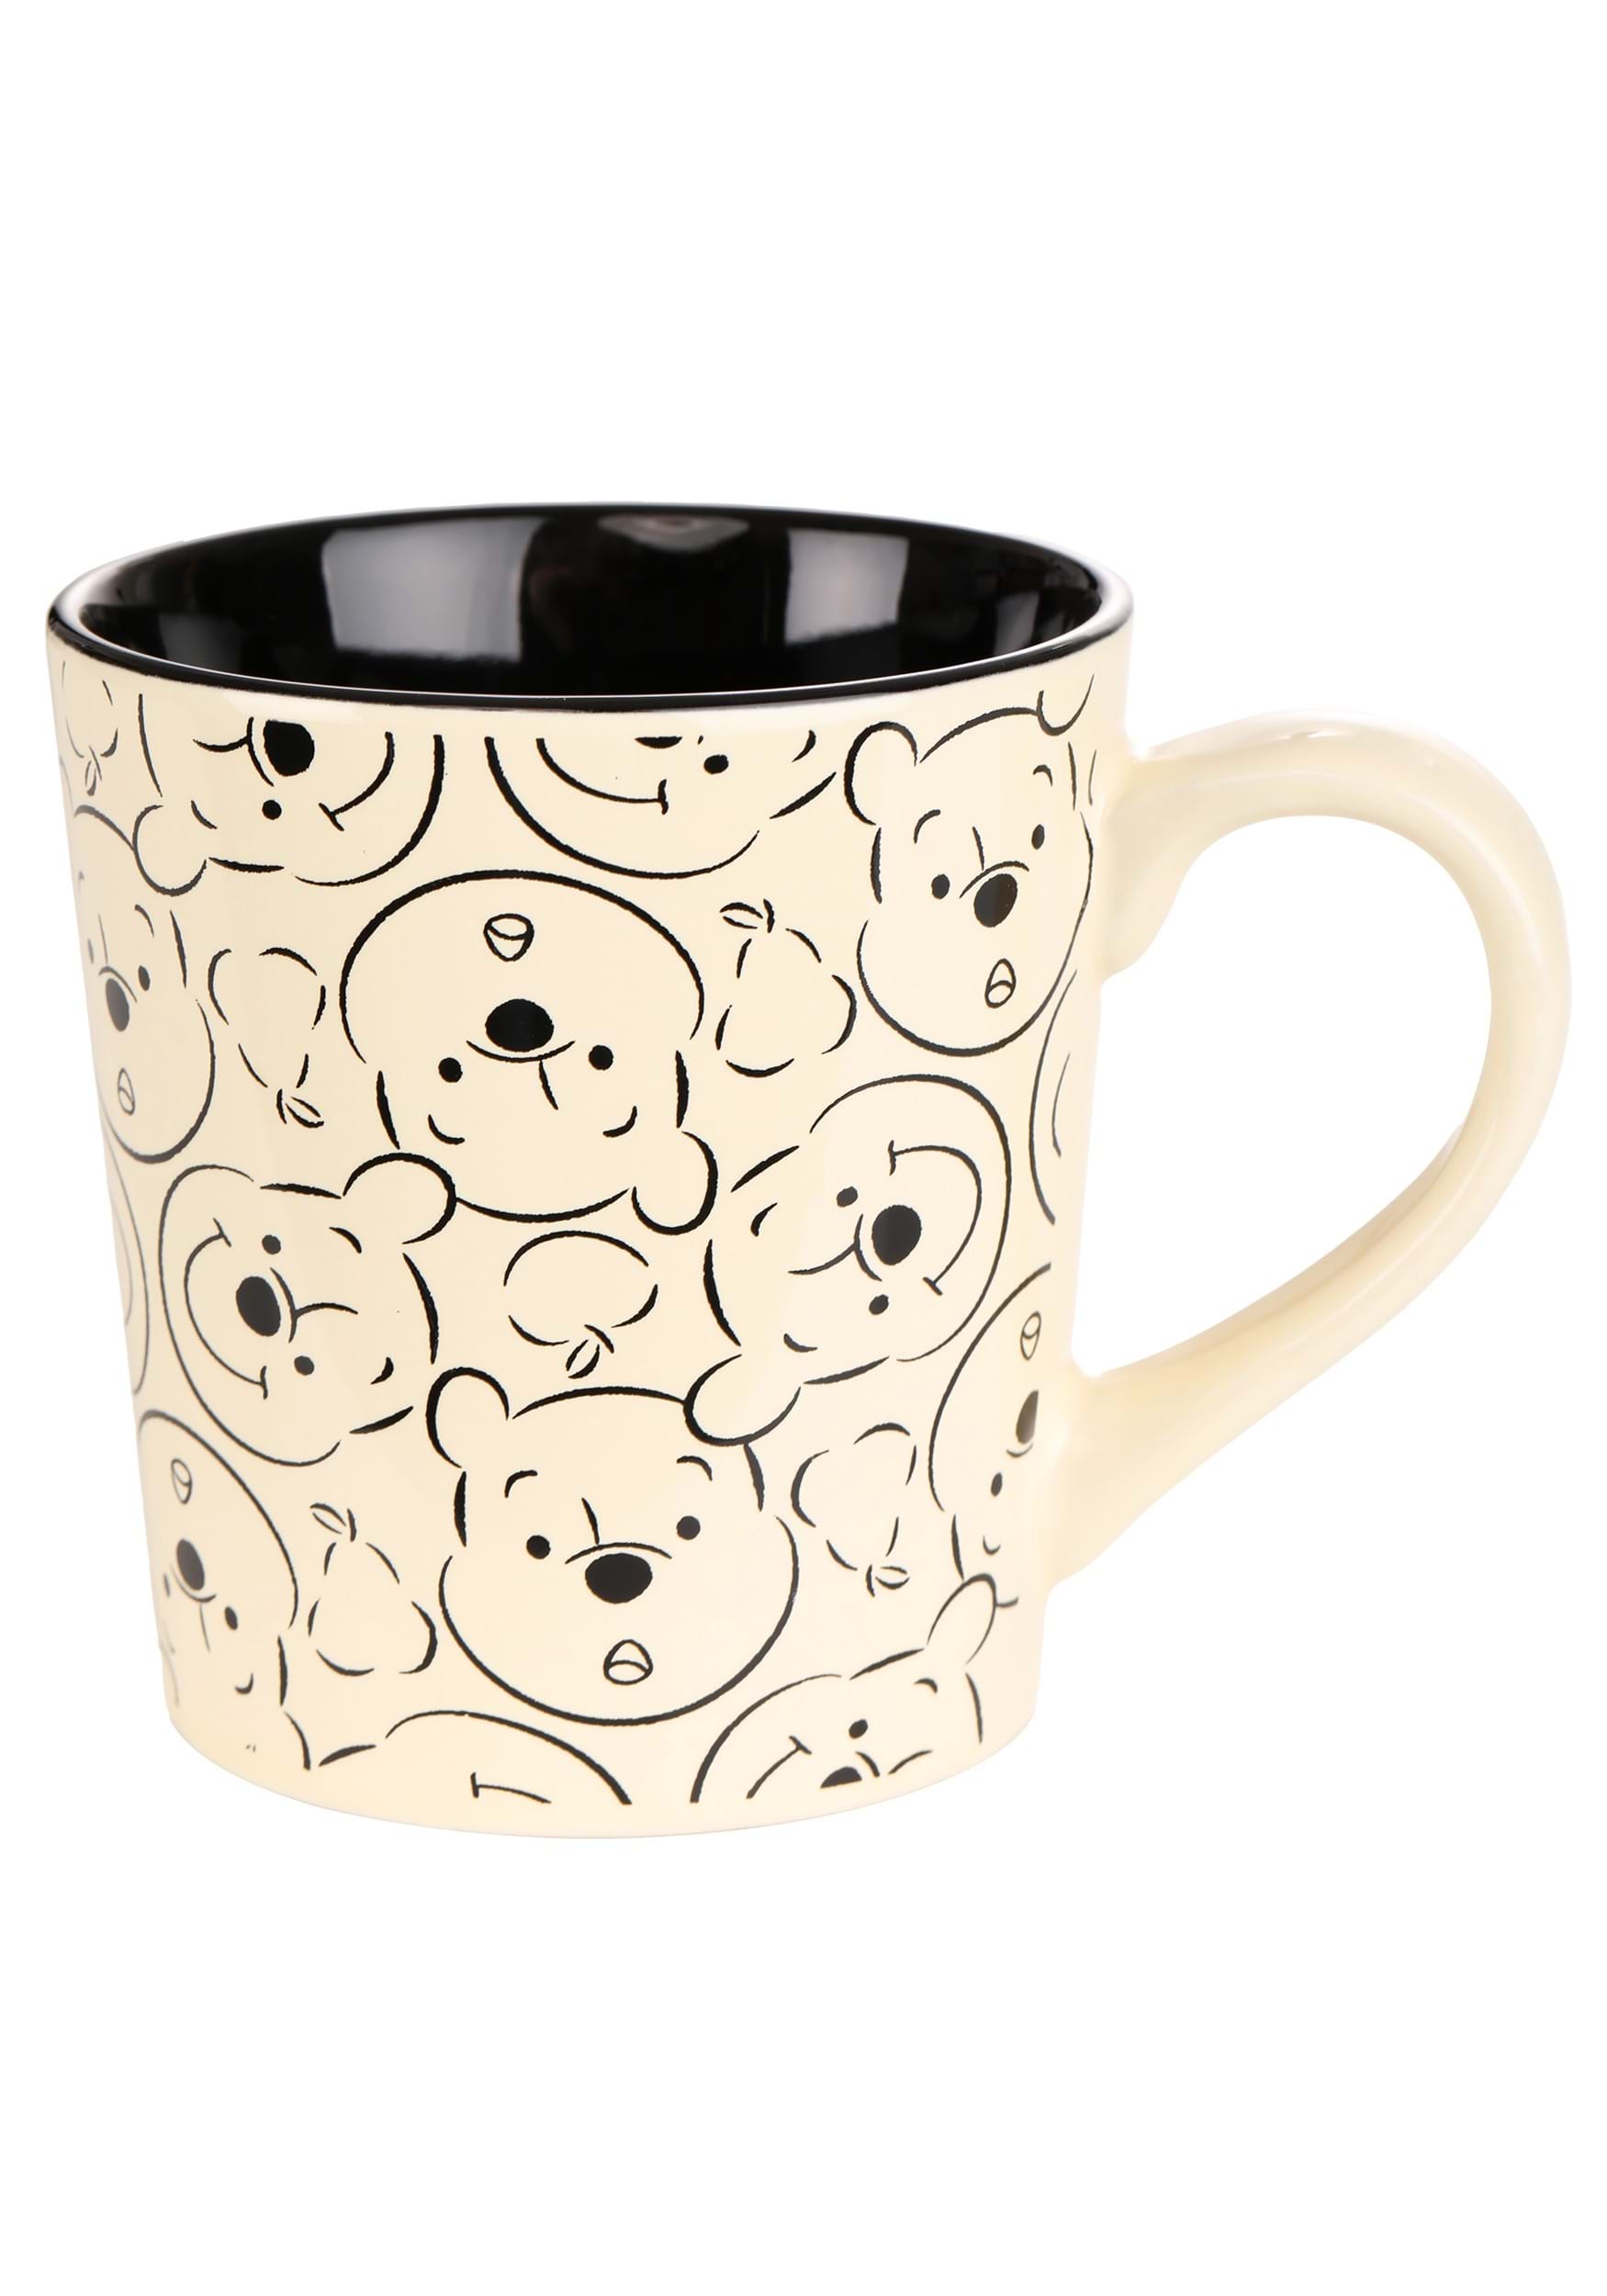 https://images.fun.com/products/86616/1-1/winnie-the-pooh-expressions-mug.jpg